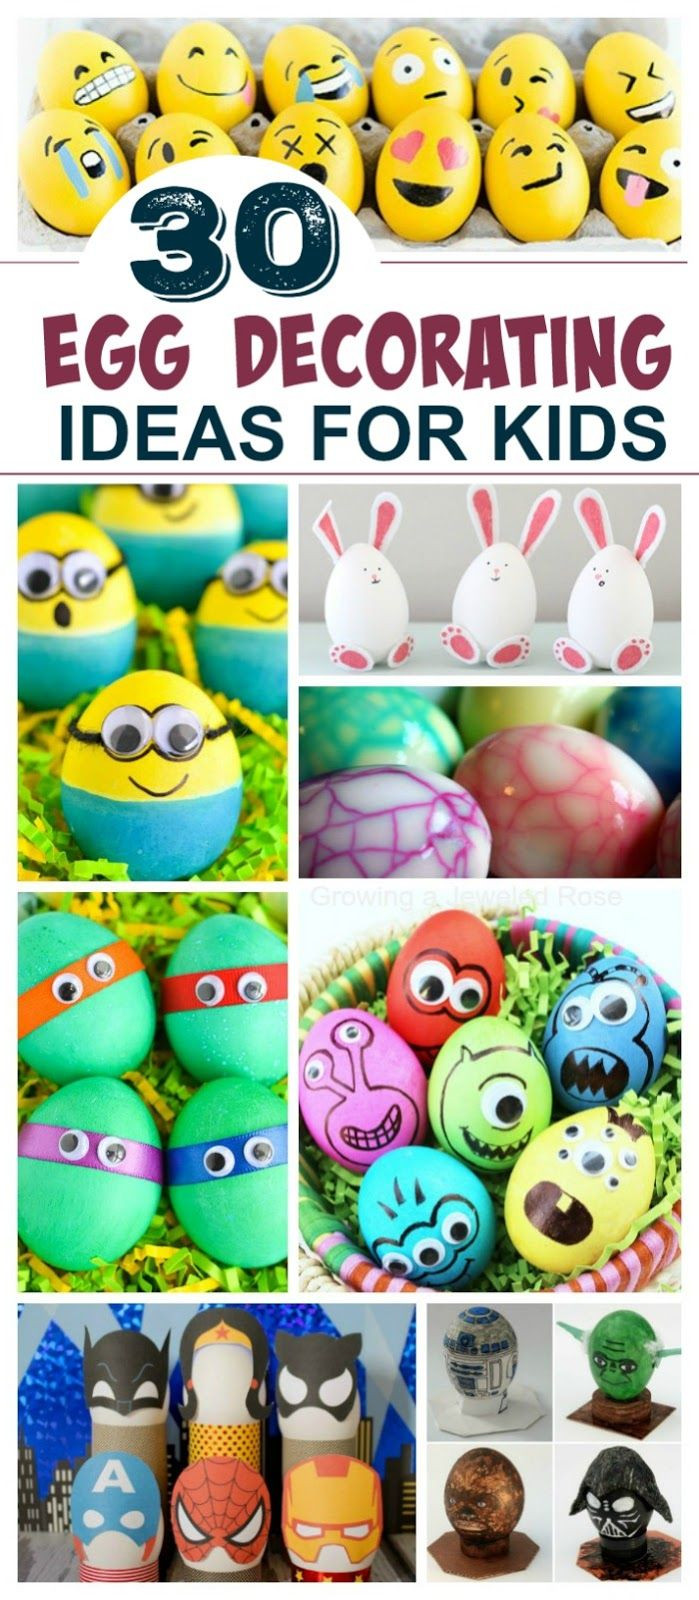 Easter Egg Dying Party Ideas
 Egg Decorating Ideas Easter crafts Pinterest